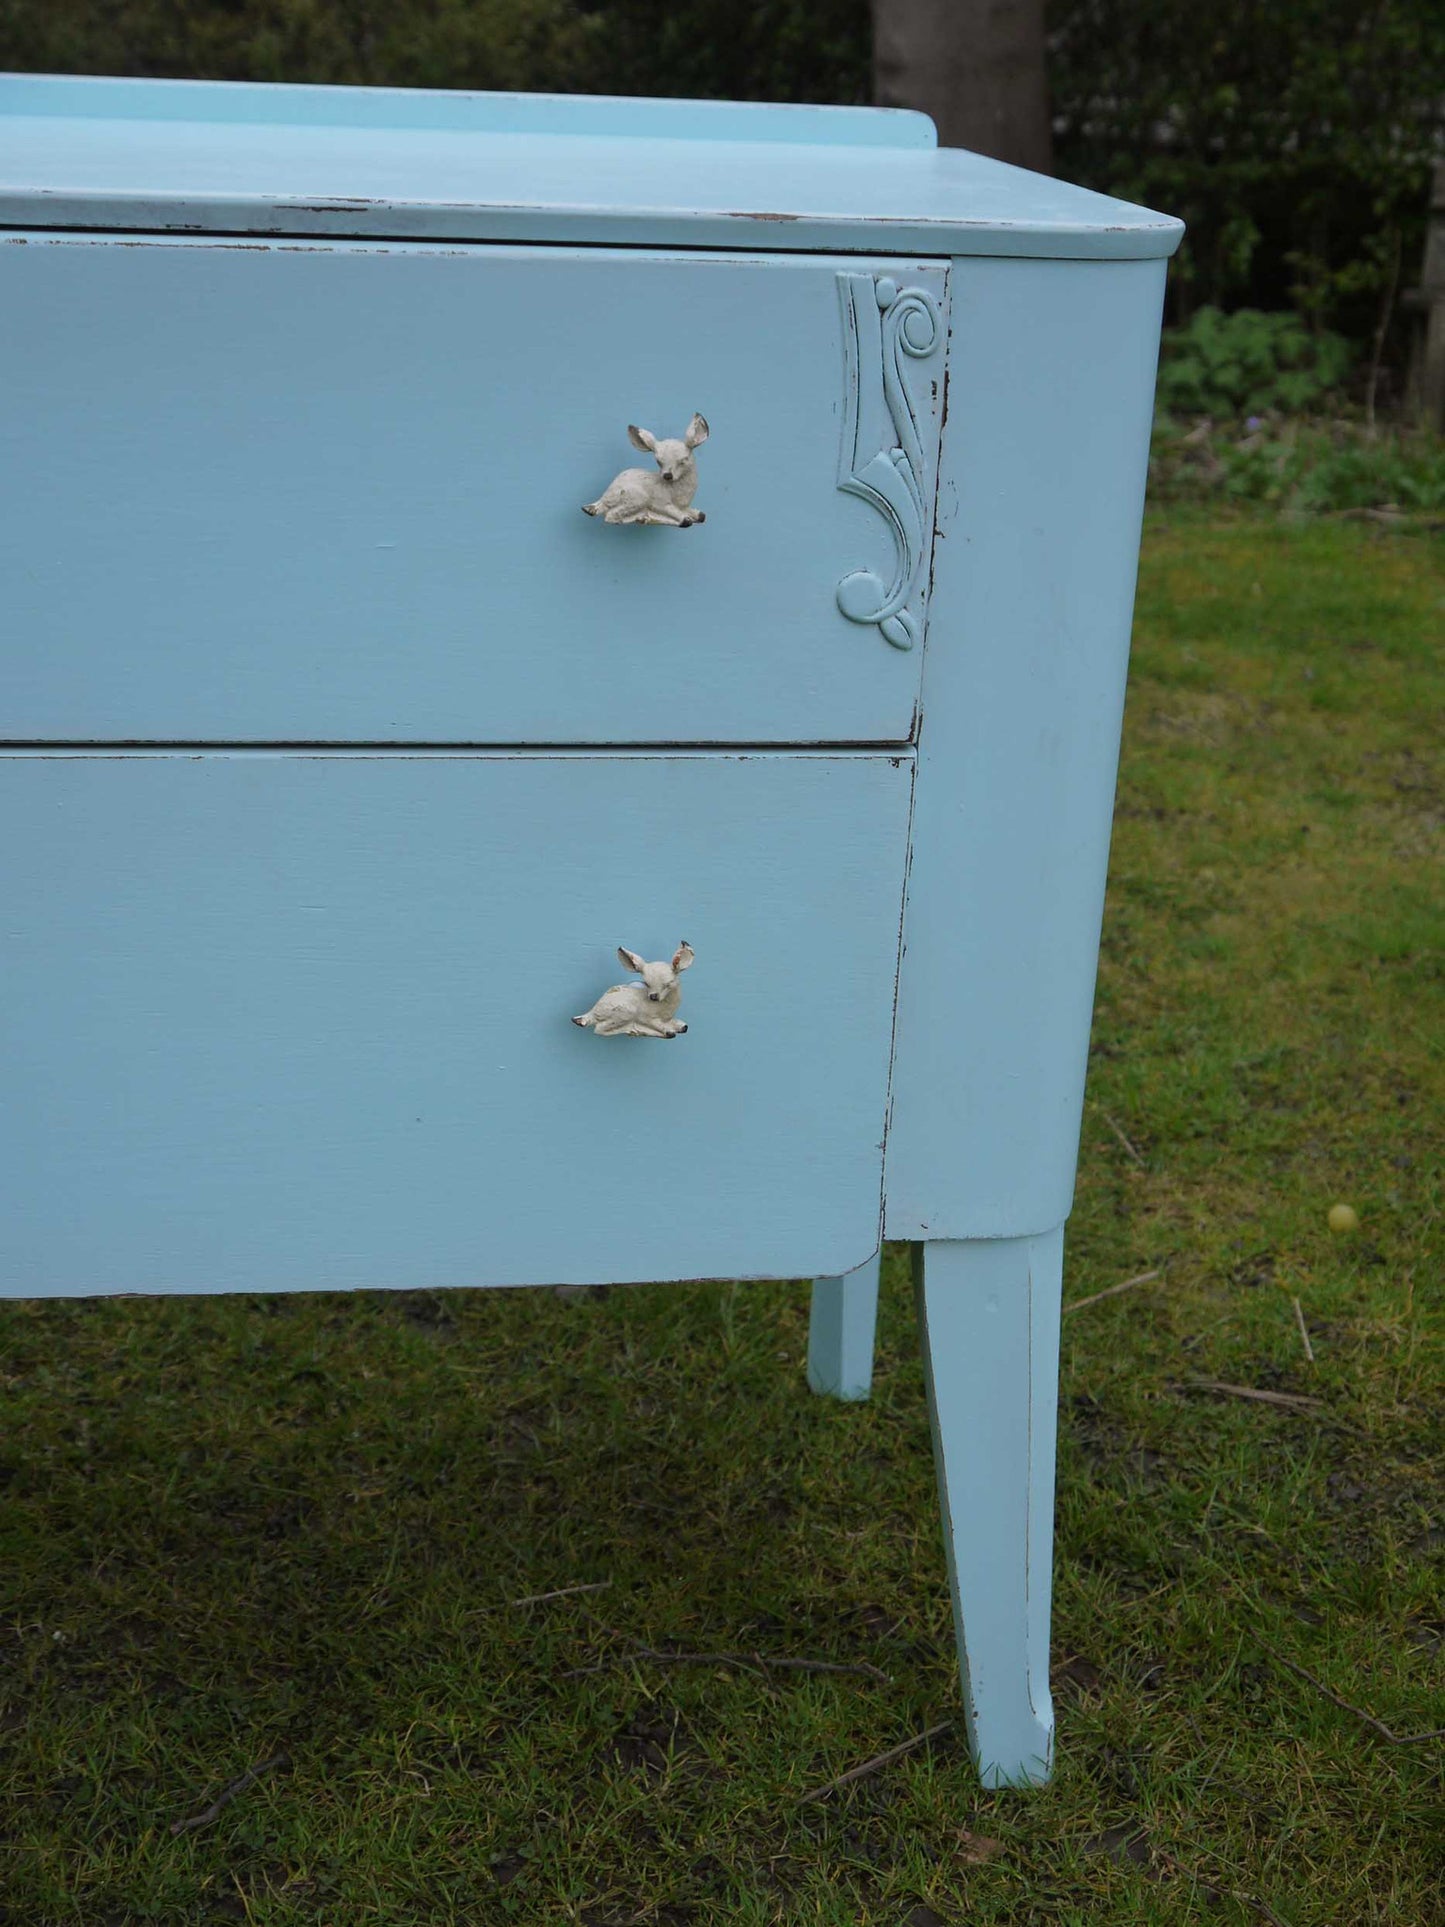 Vintage children's chest of drawers hand panted in Ecos organic paint in baby blue with new fawn handles in cream